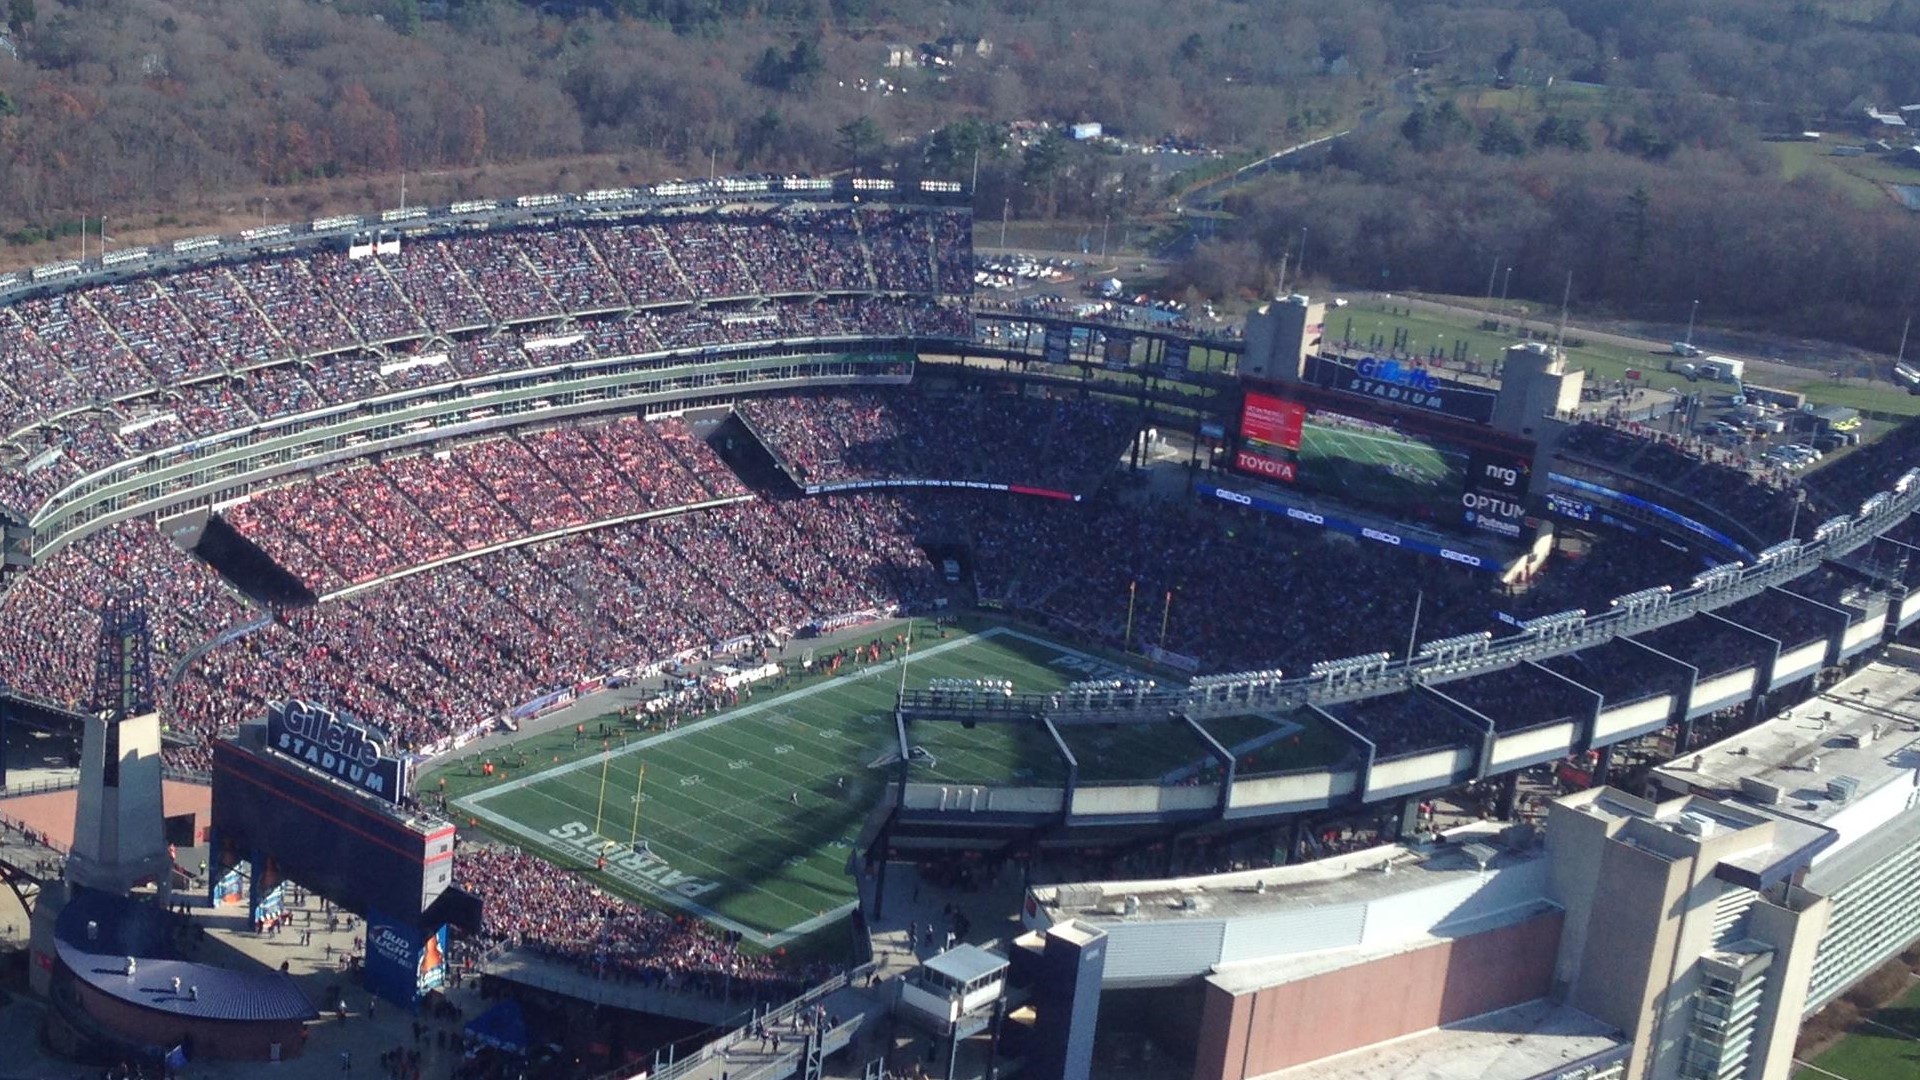 NFL Bag Policy in Affect for 2016 Games at Gillette of Massachusetts Athletics